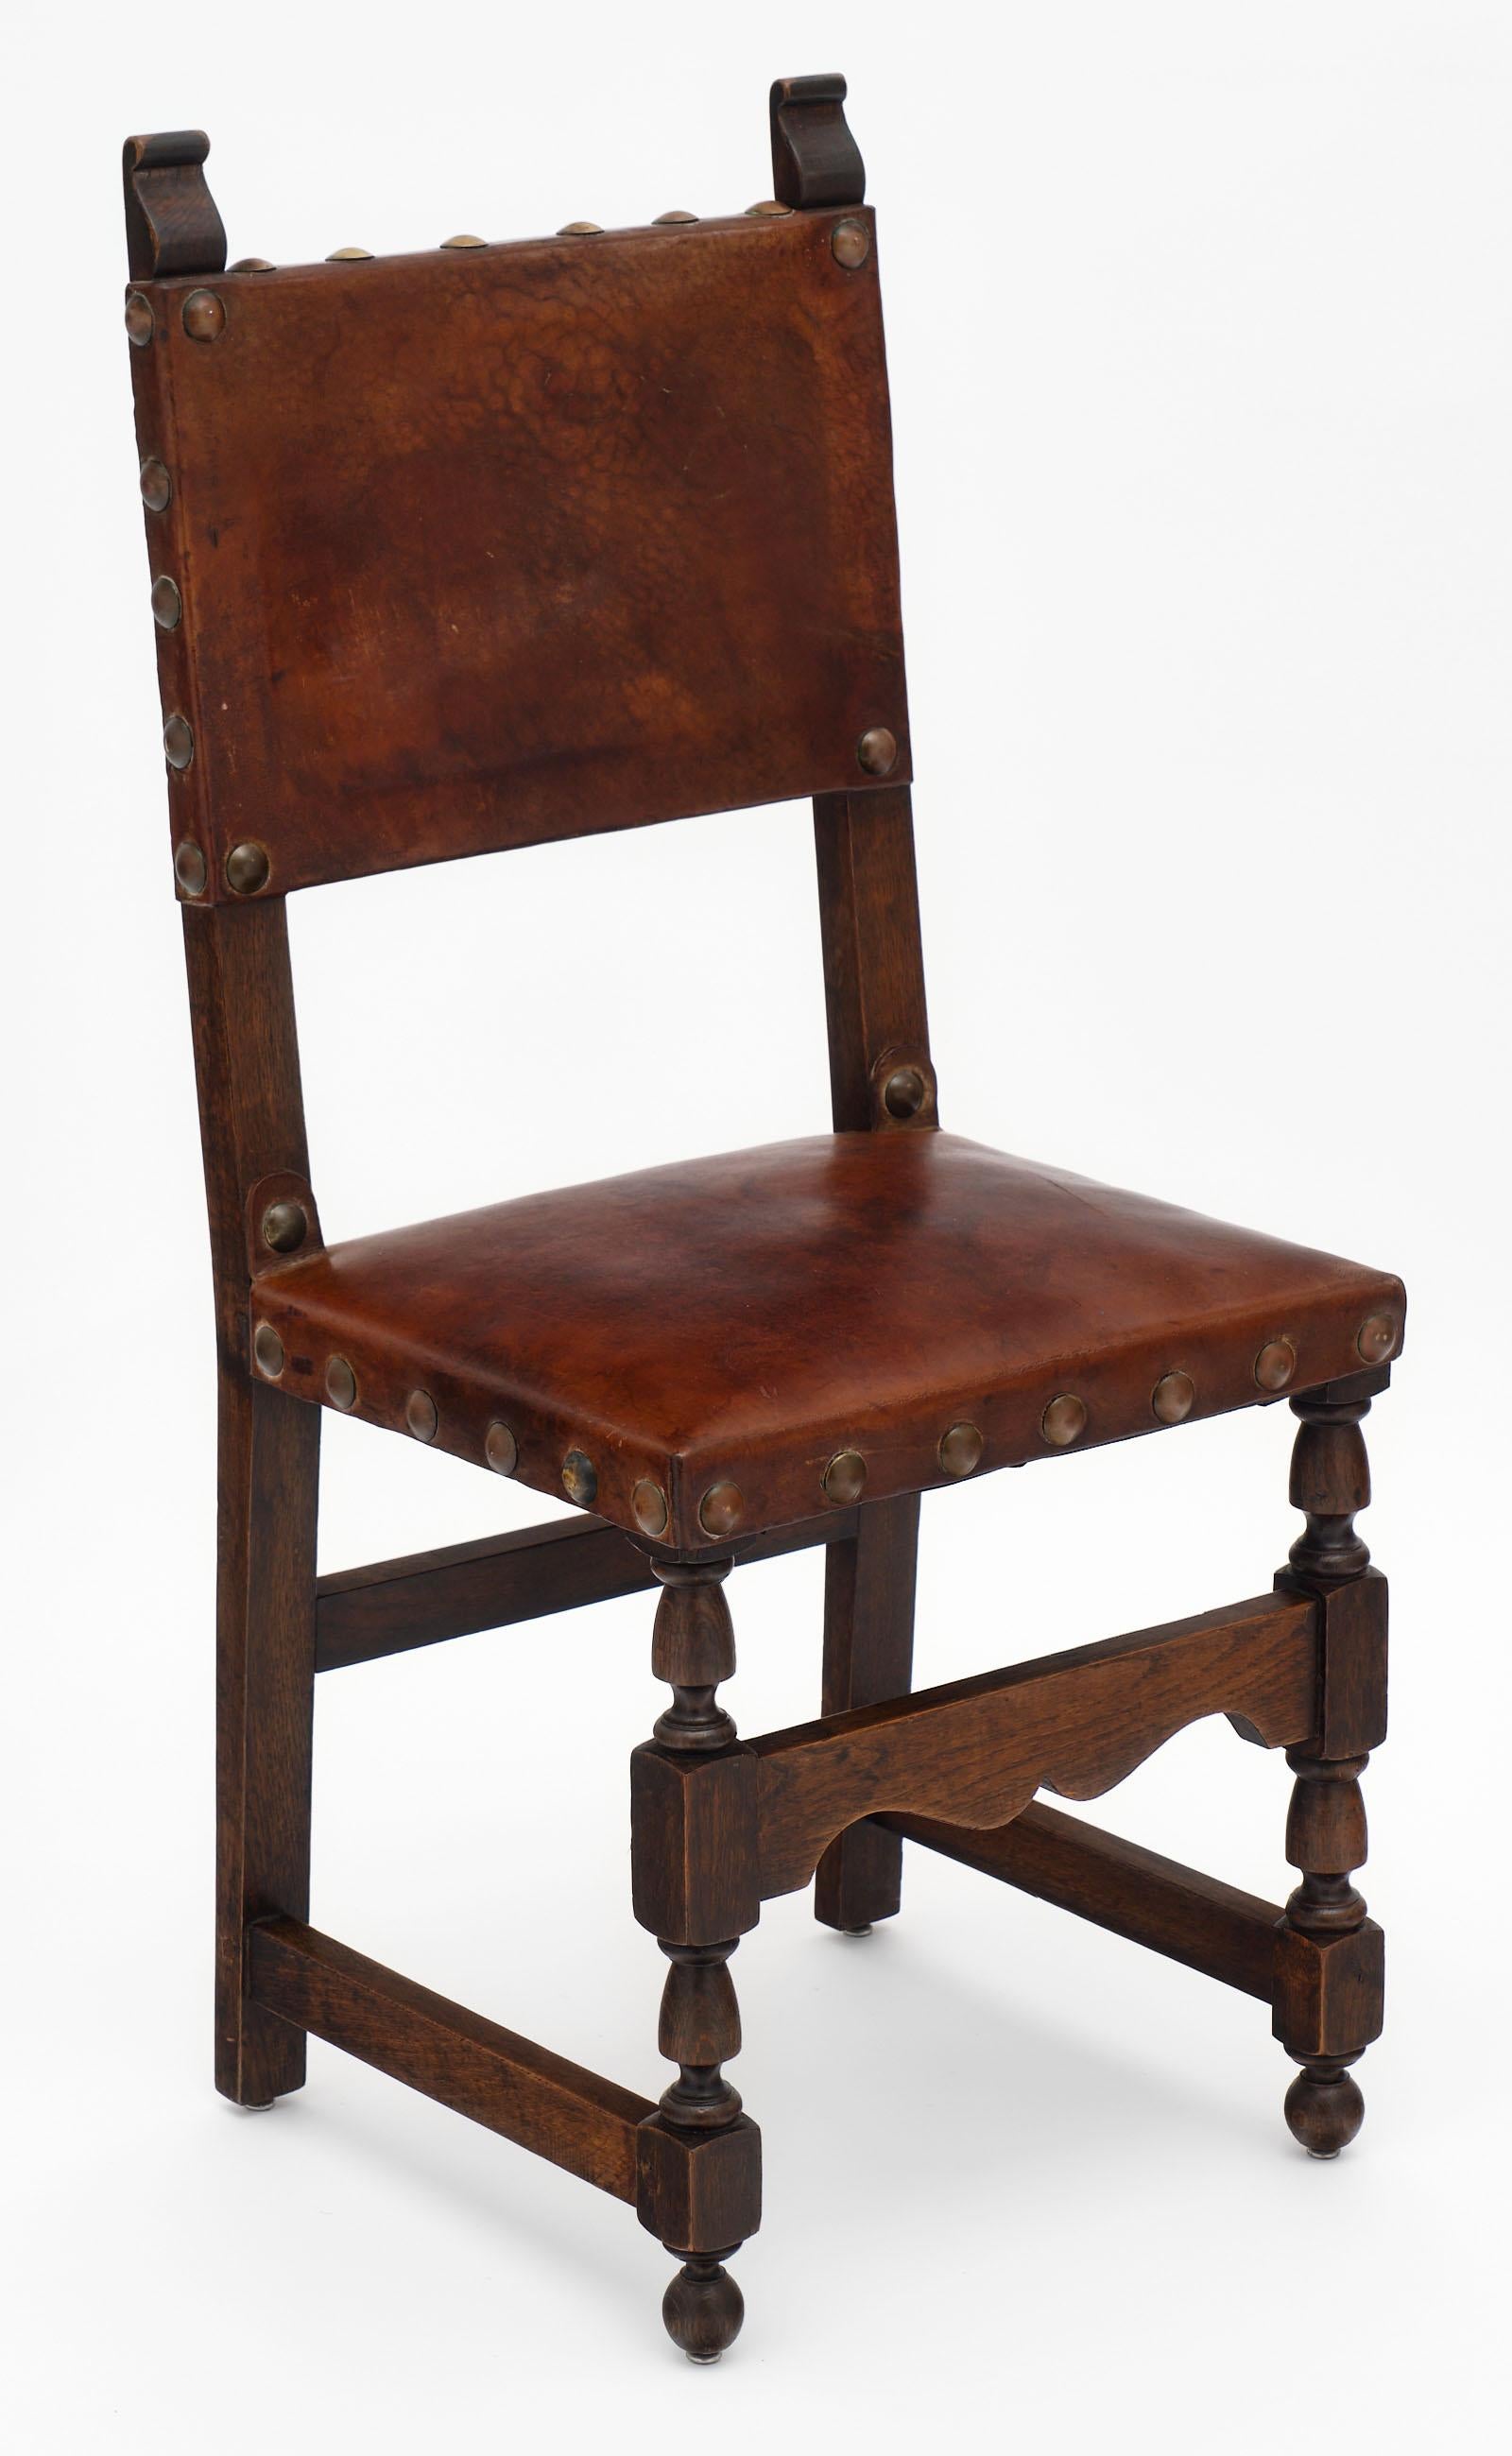 Rare set of ten Renaissance style leather dining chairs featuring hand carved wood, leather seats, and original brass studs. The front legs are beautifully turned and the seats are quite comfortable.